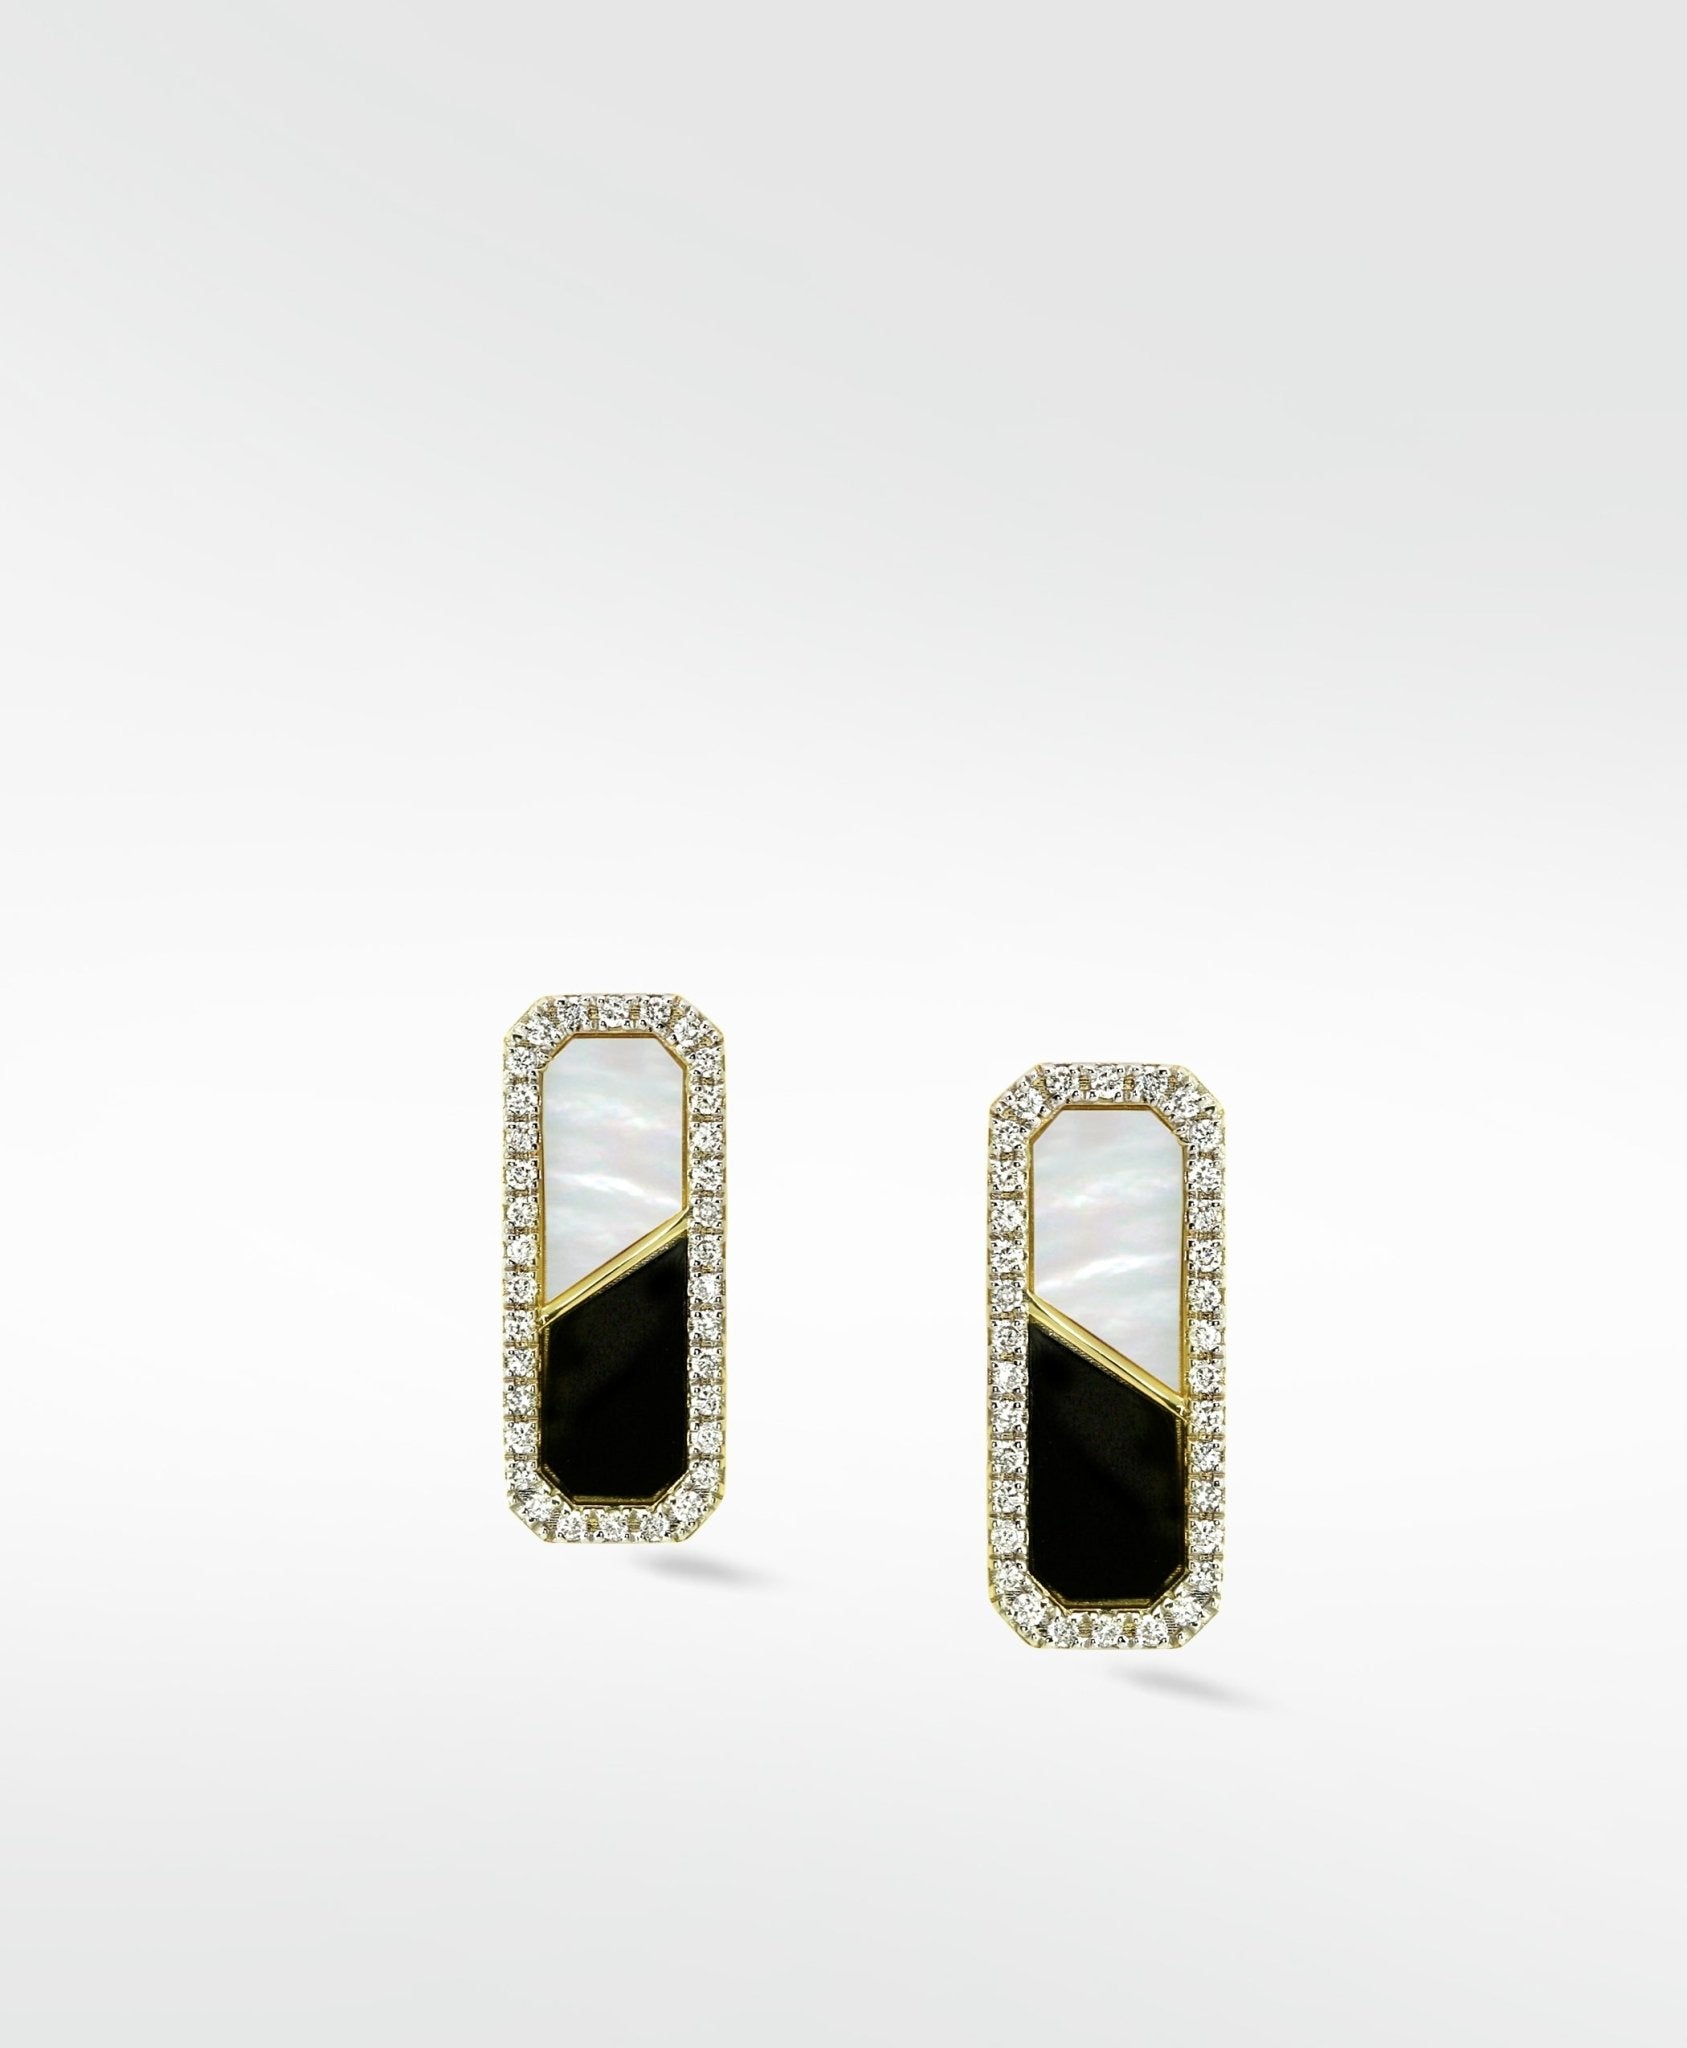 Eclipsis Diamond, Mother of Pearl and Onyx Earrings in 18k Yellow Gold - Lark and Berry